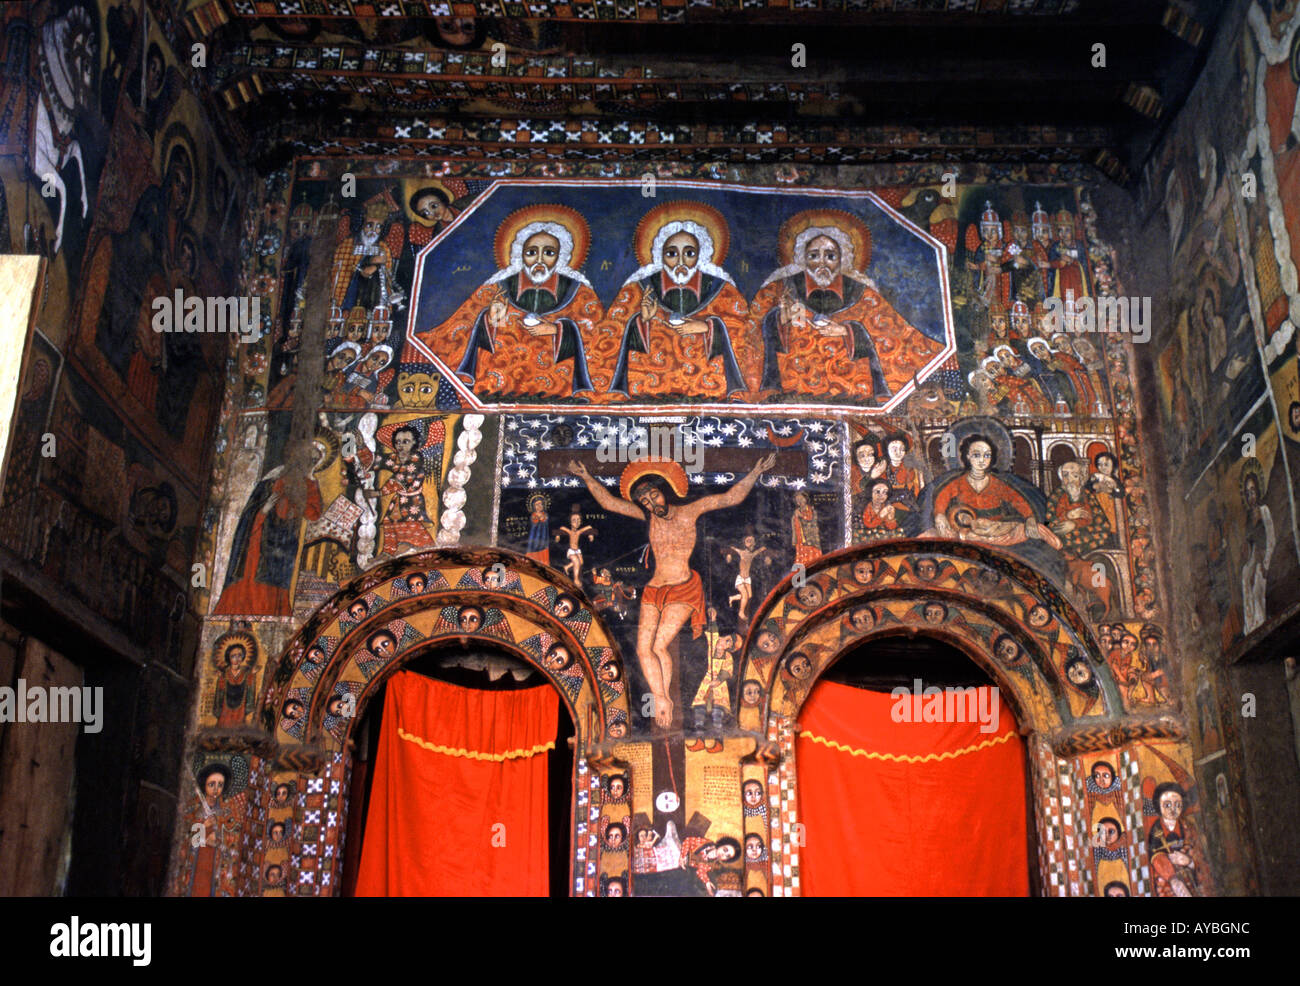 Painting of the crucifiction on the walls of the church of Debre Birhan Selasie in Gondar Ethiopia Stock Photo